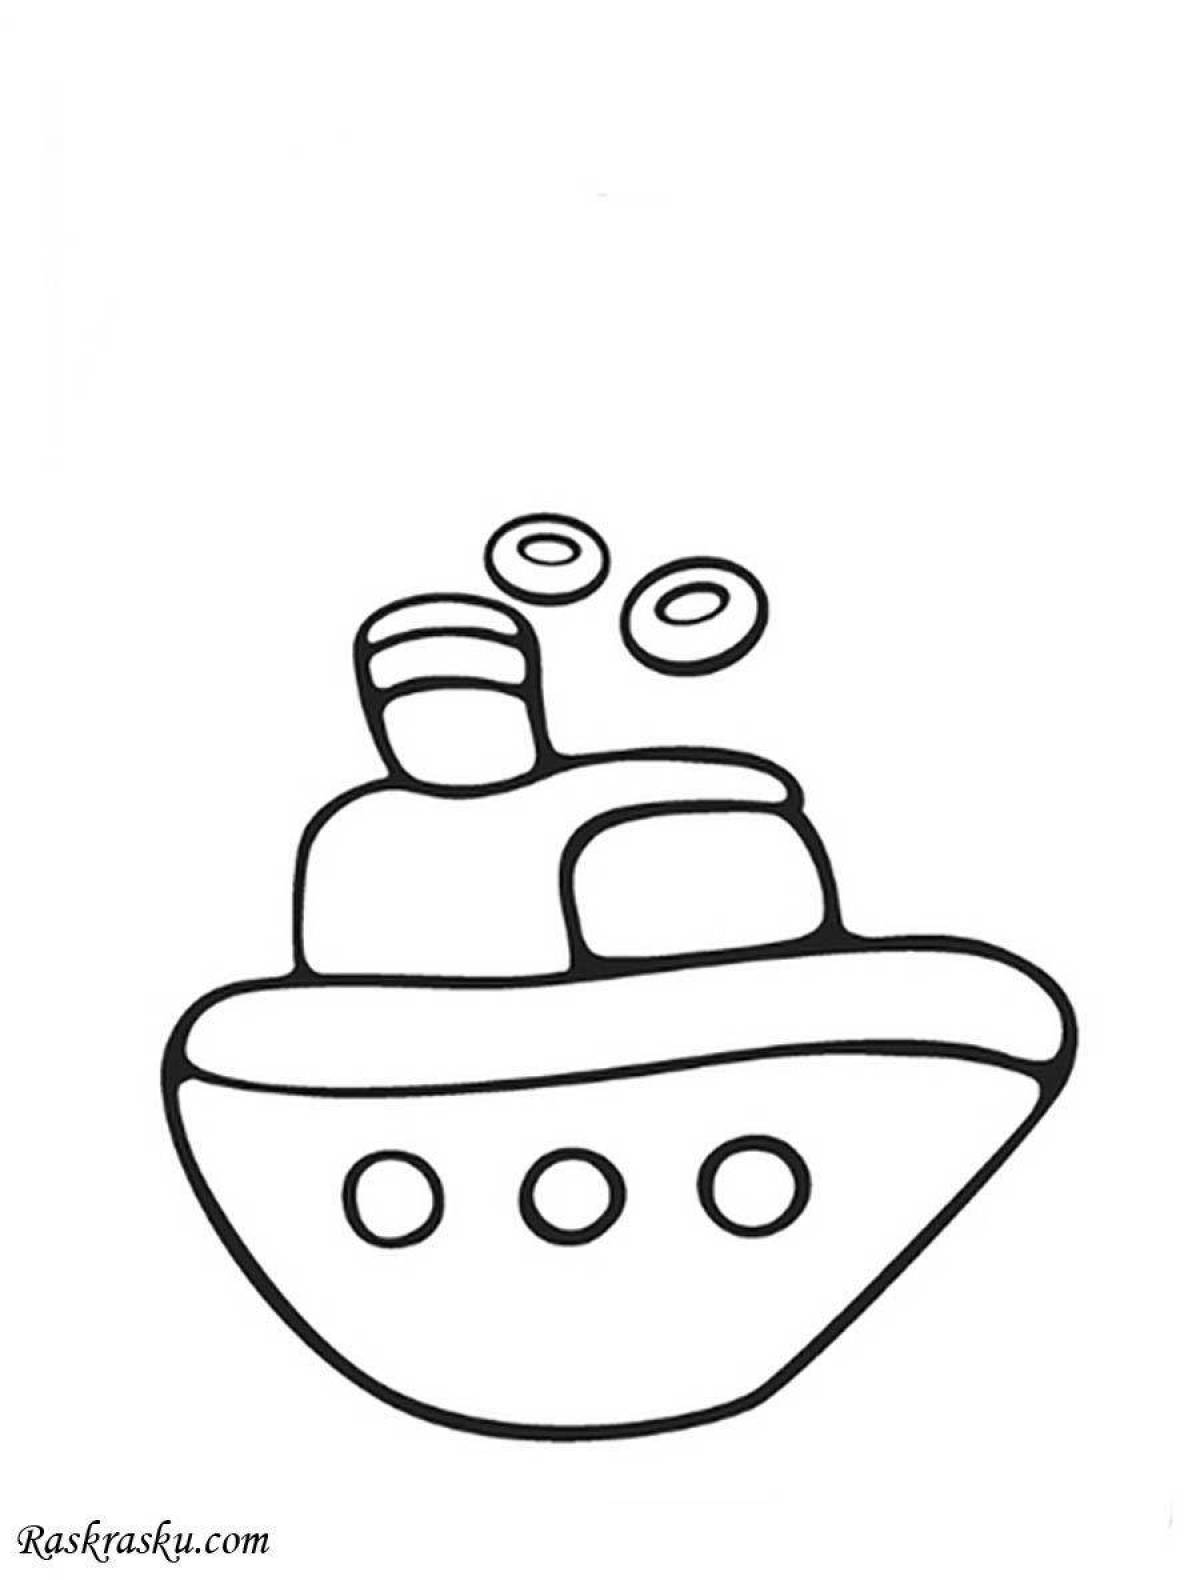 Attractive boat coloring for kids